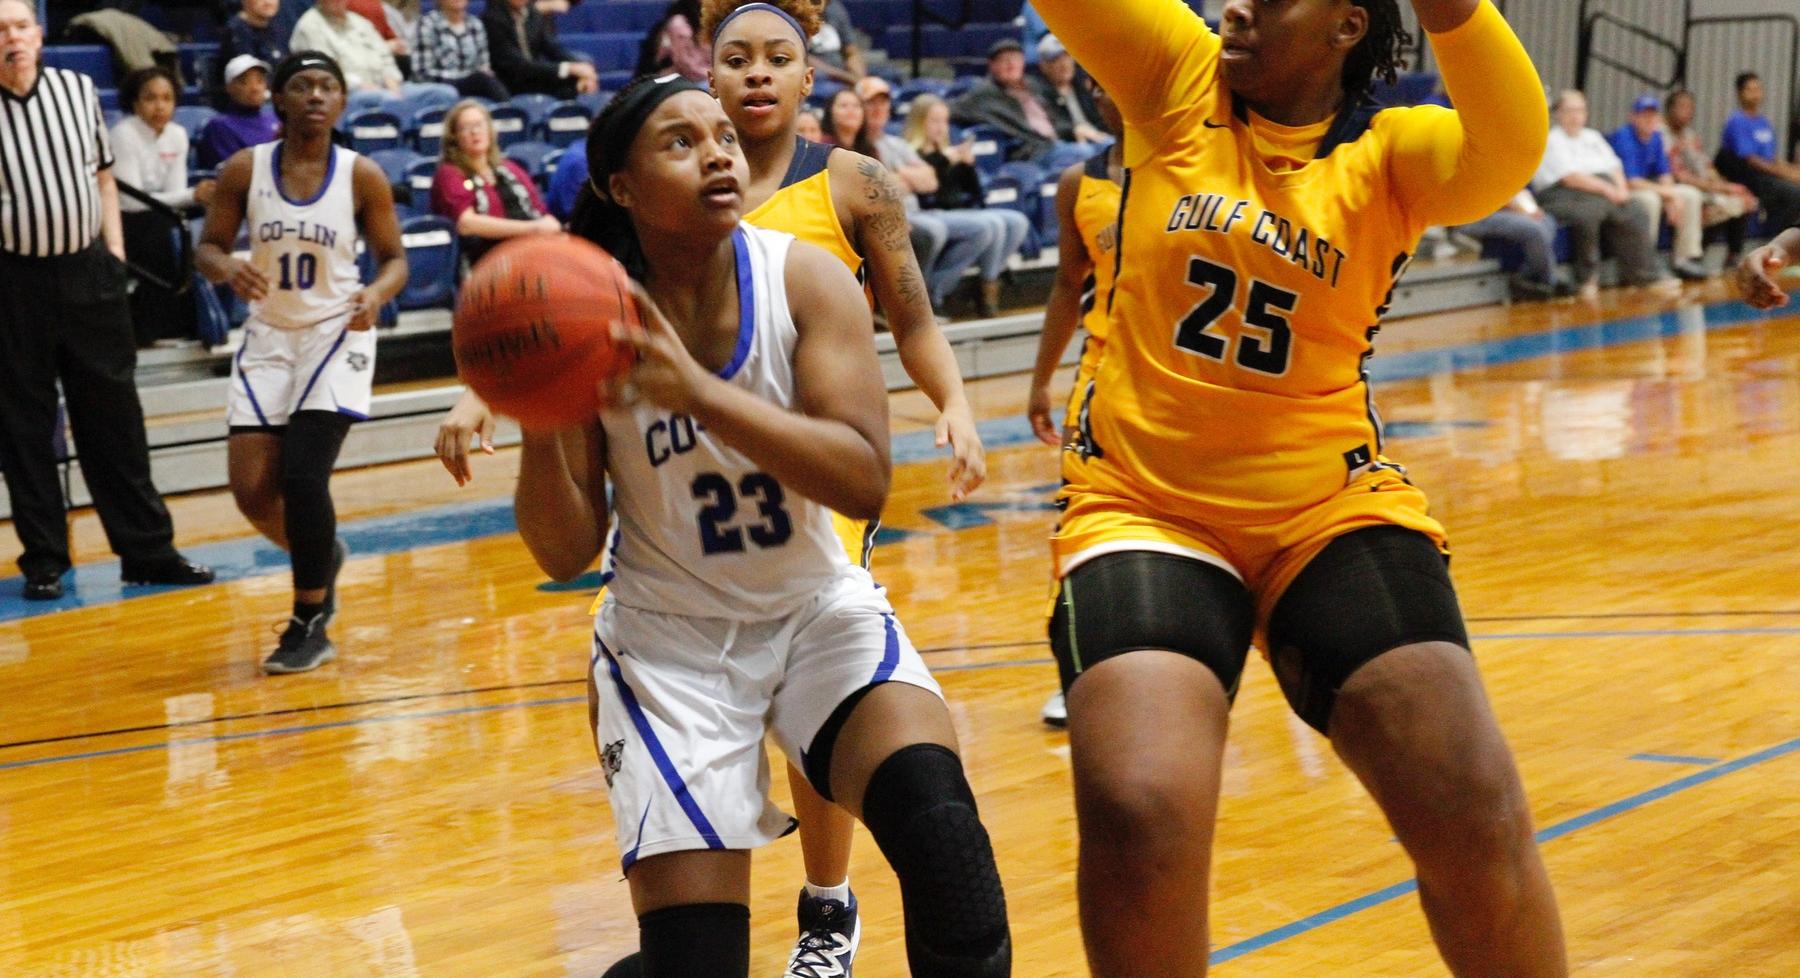 Lady Wolves take down Gulf Coast, 68-63, in overtime